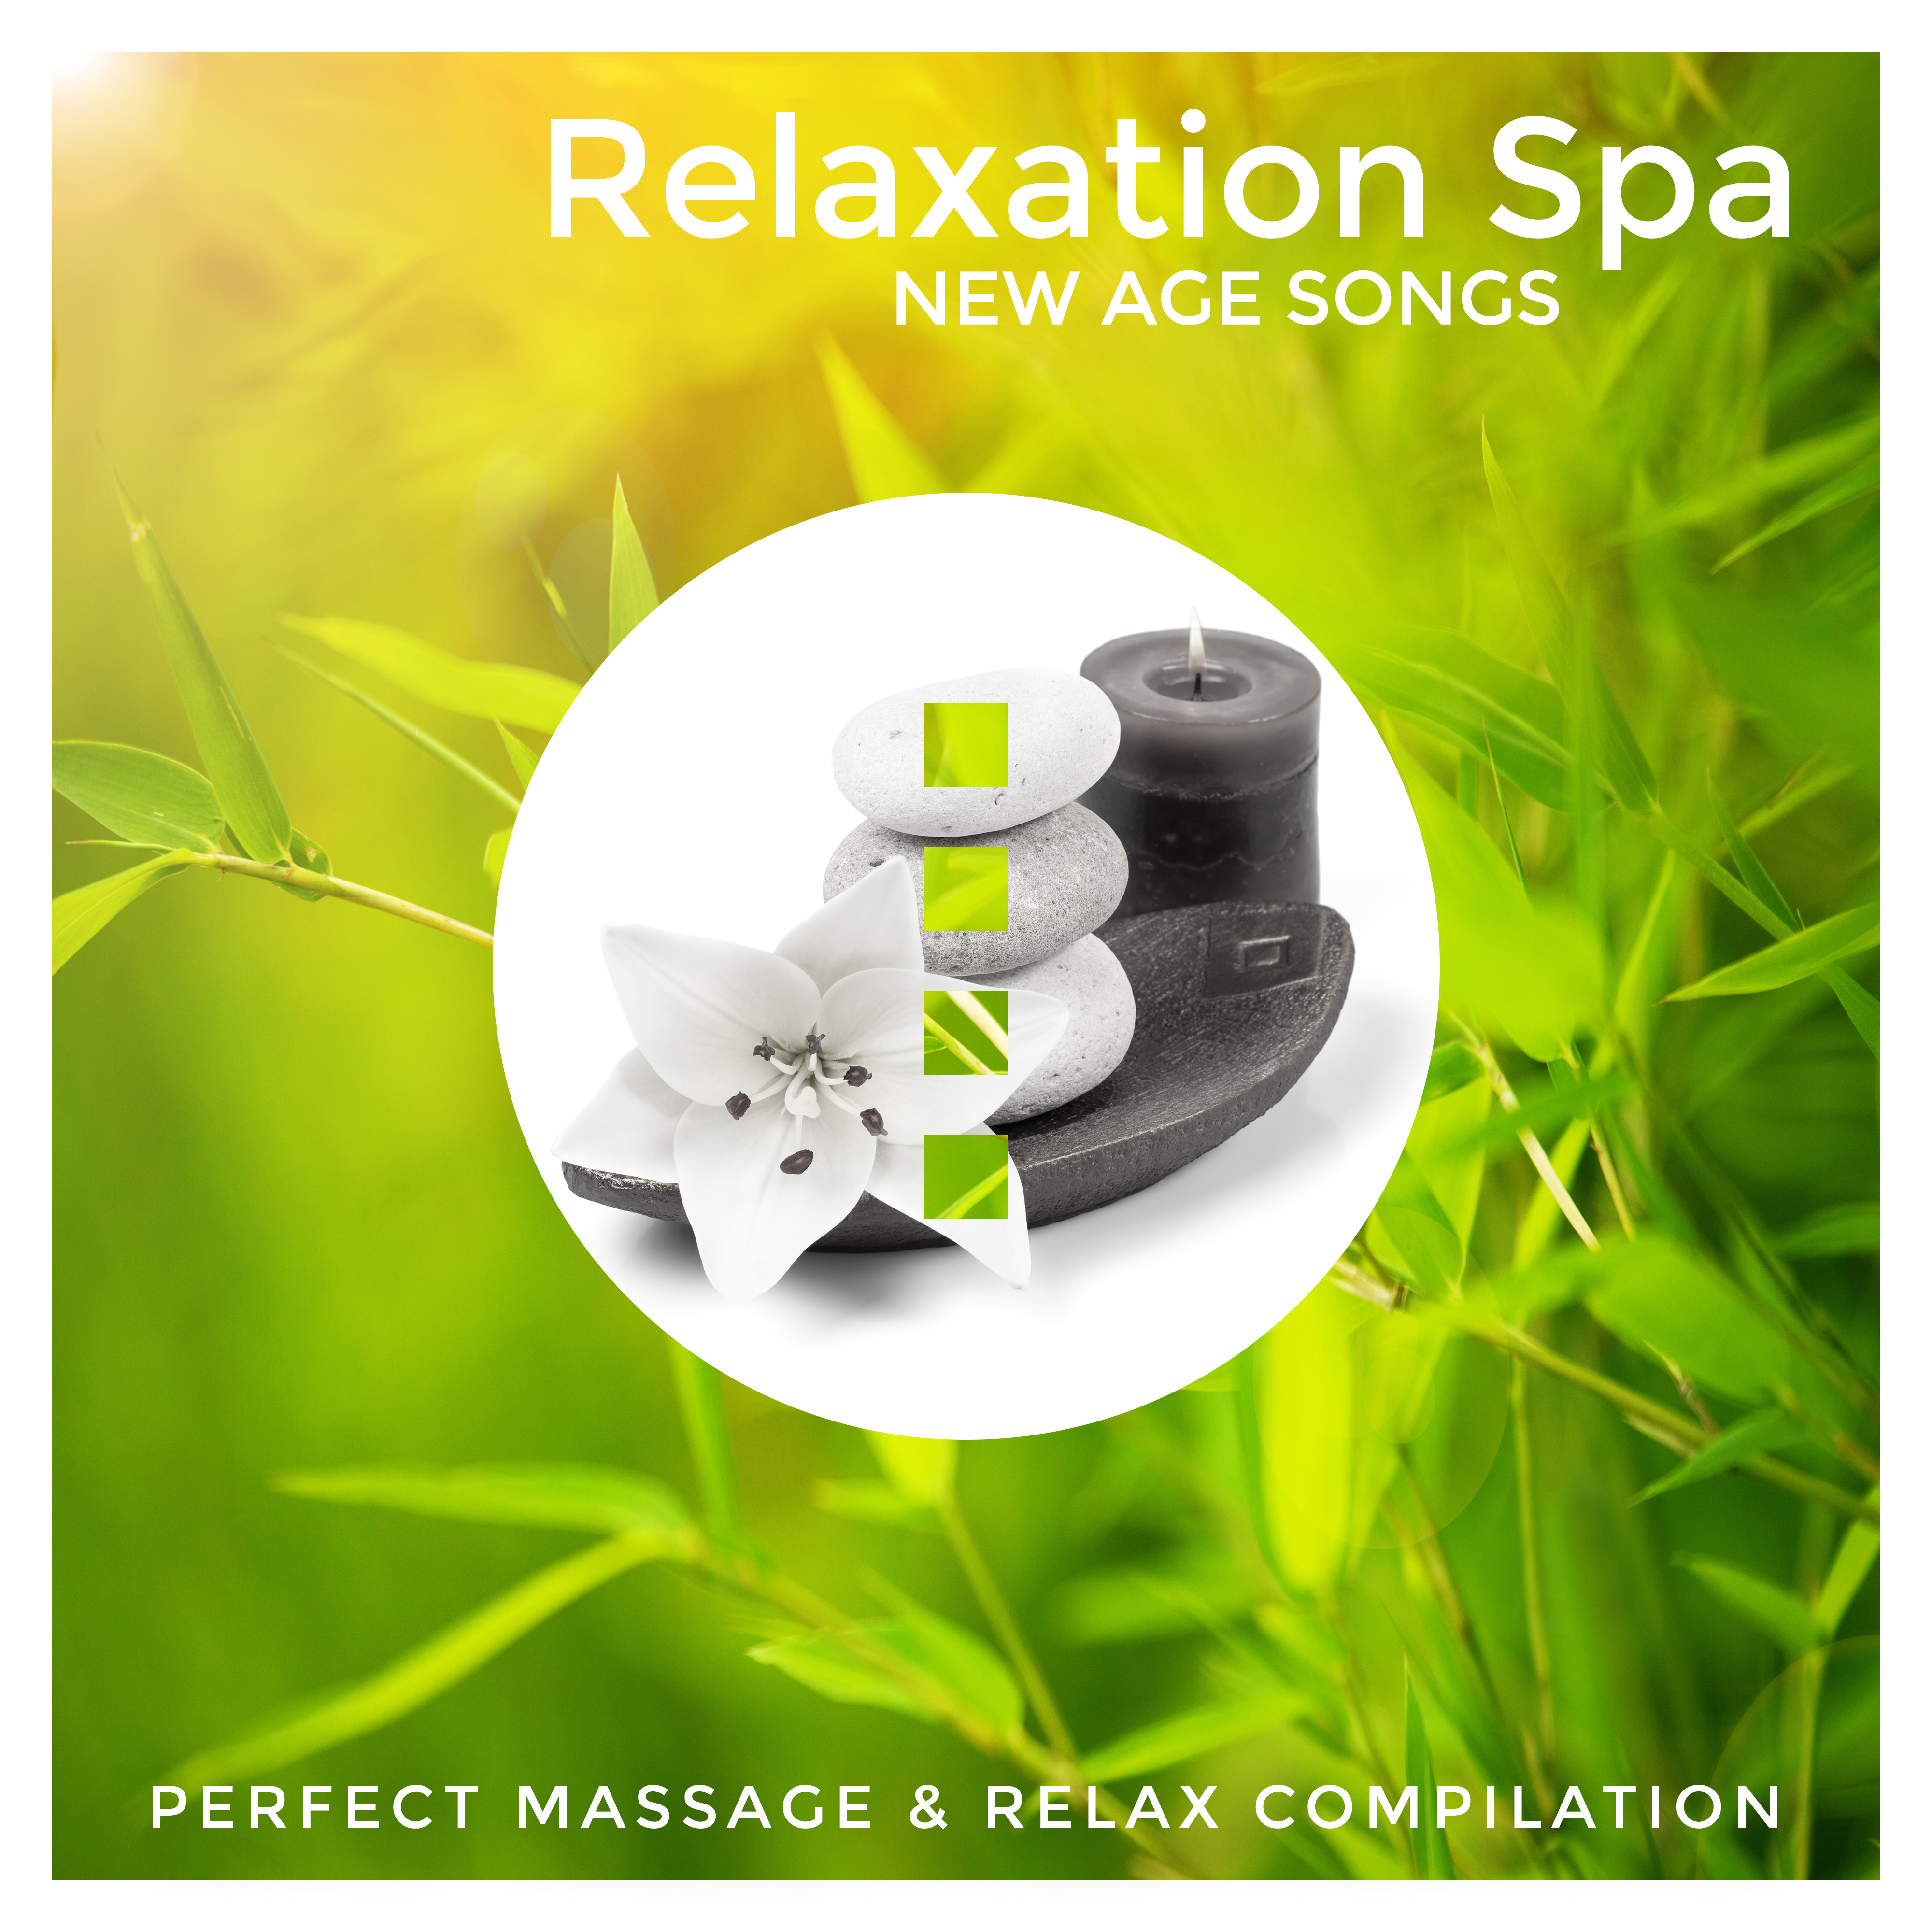 Relaxation Spa New Age Songs – Perfect Massage & Relax Compilation